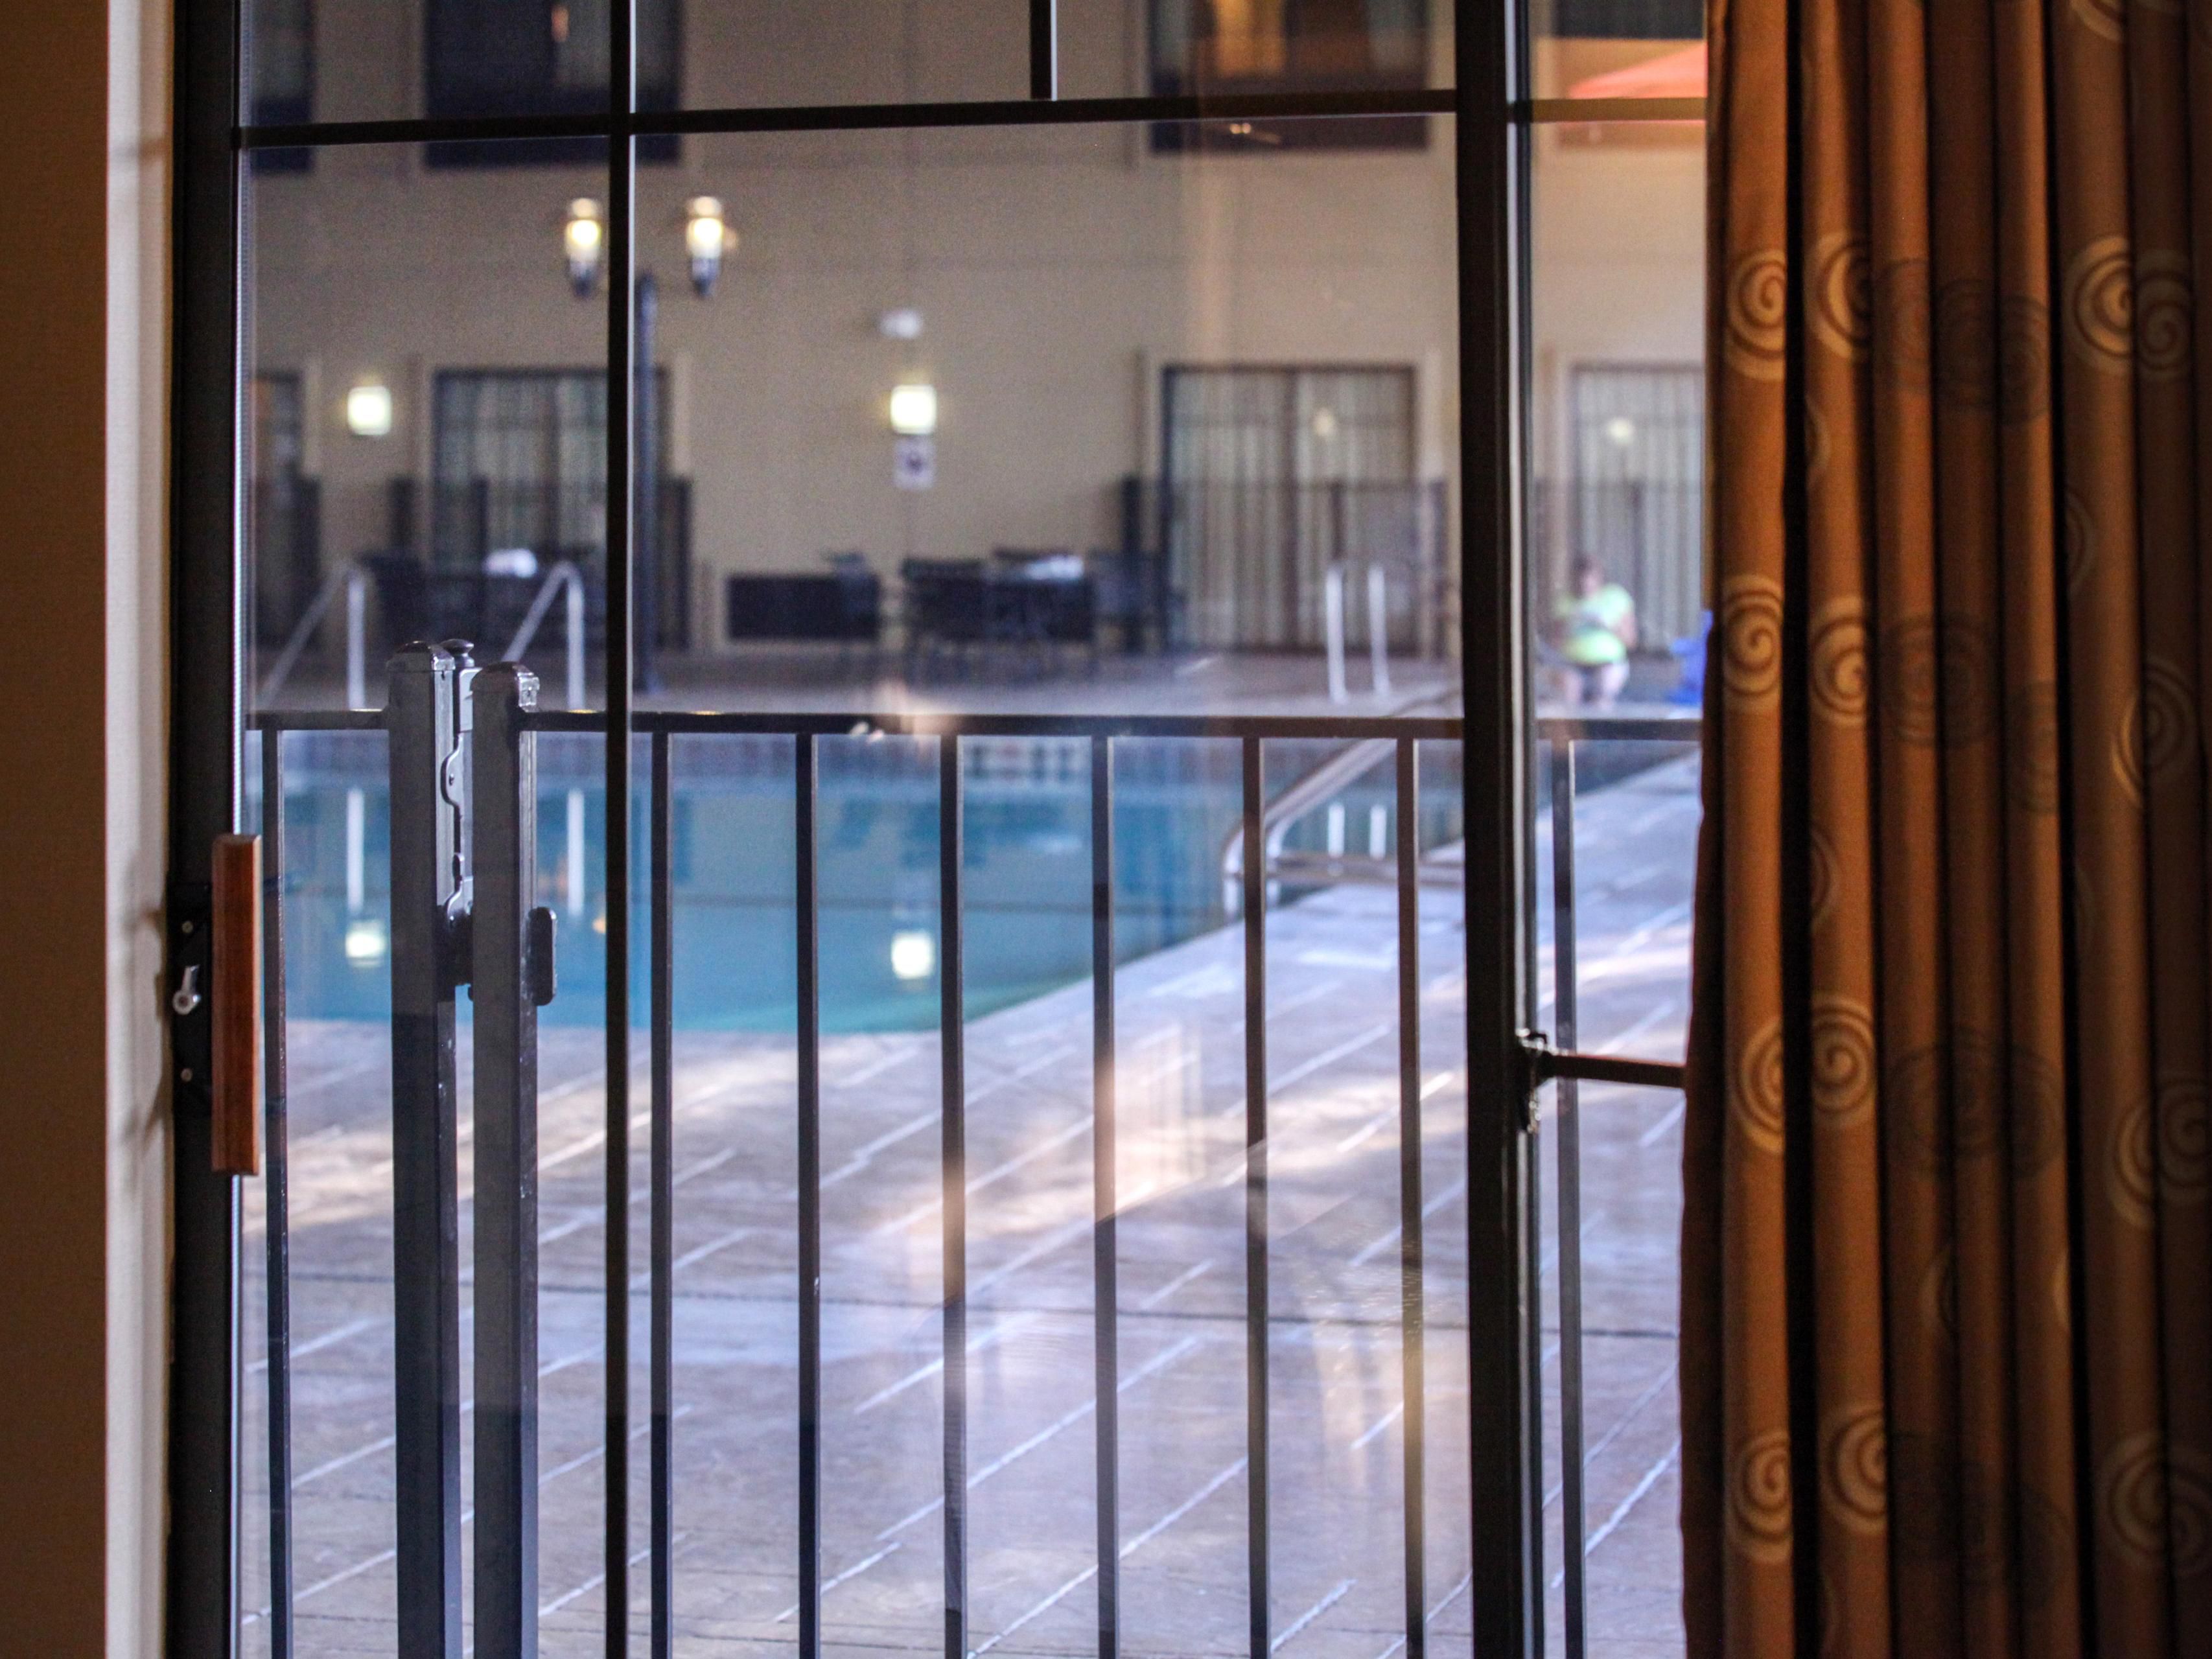 Treat yourself to one of Greater St. Paul’s most sought-after Poolside Room experiences. Multiple poolside room types and an extraordinary Family Suite are available. These rooms give our guests direct access to our large indoor pool area offering a great way to unwind and have some fun.